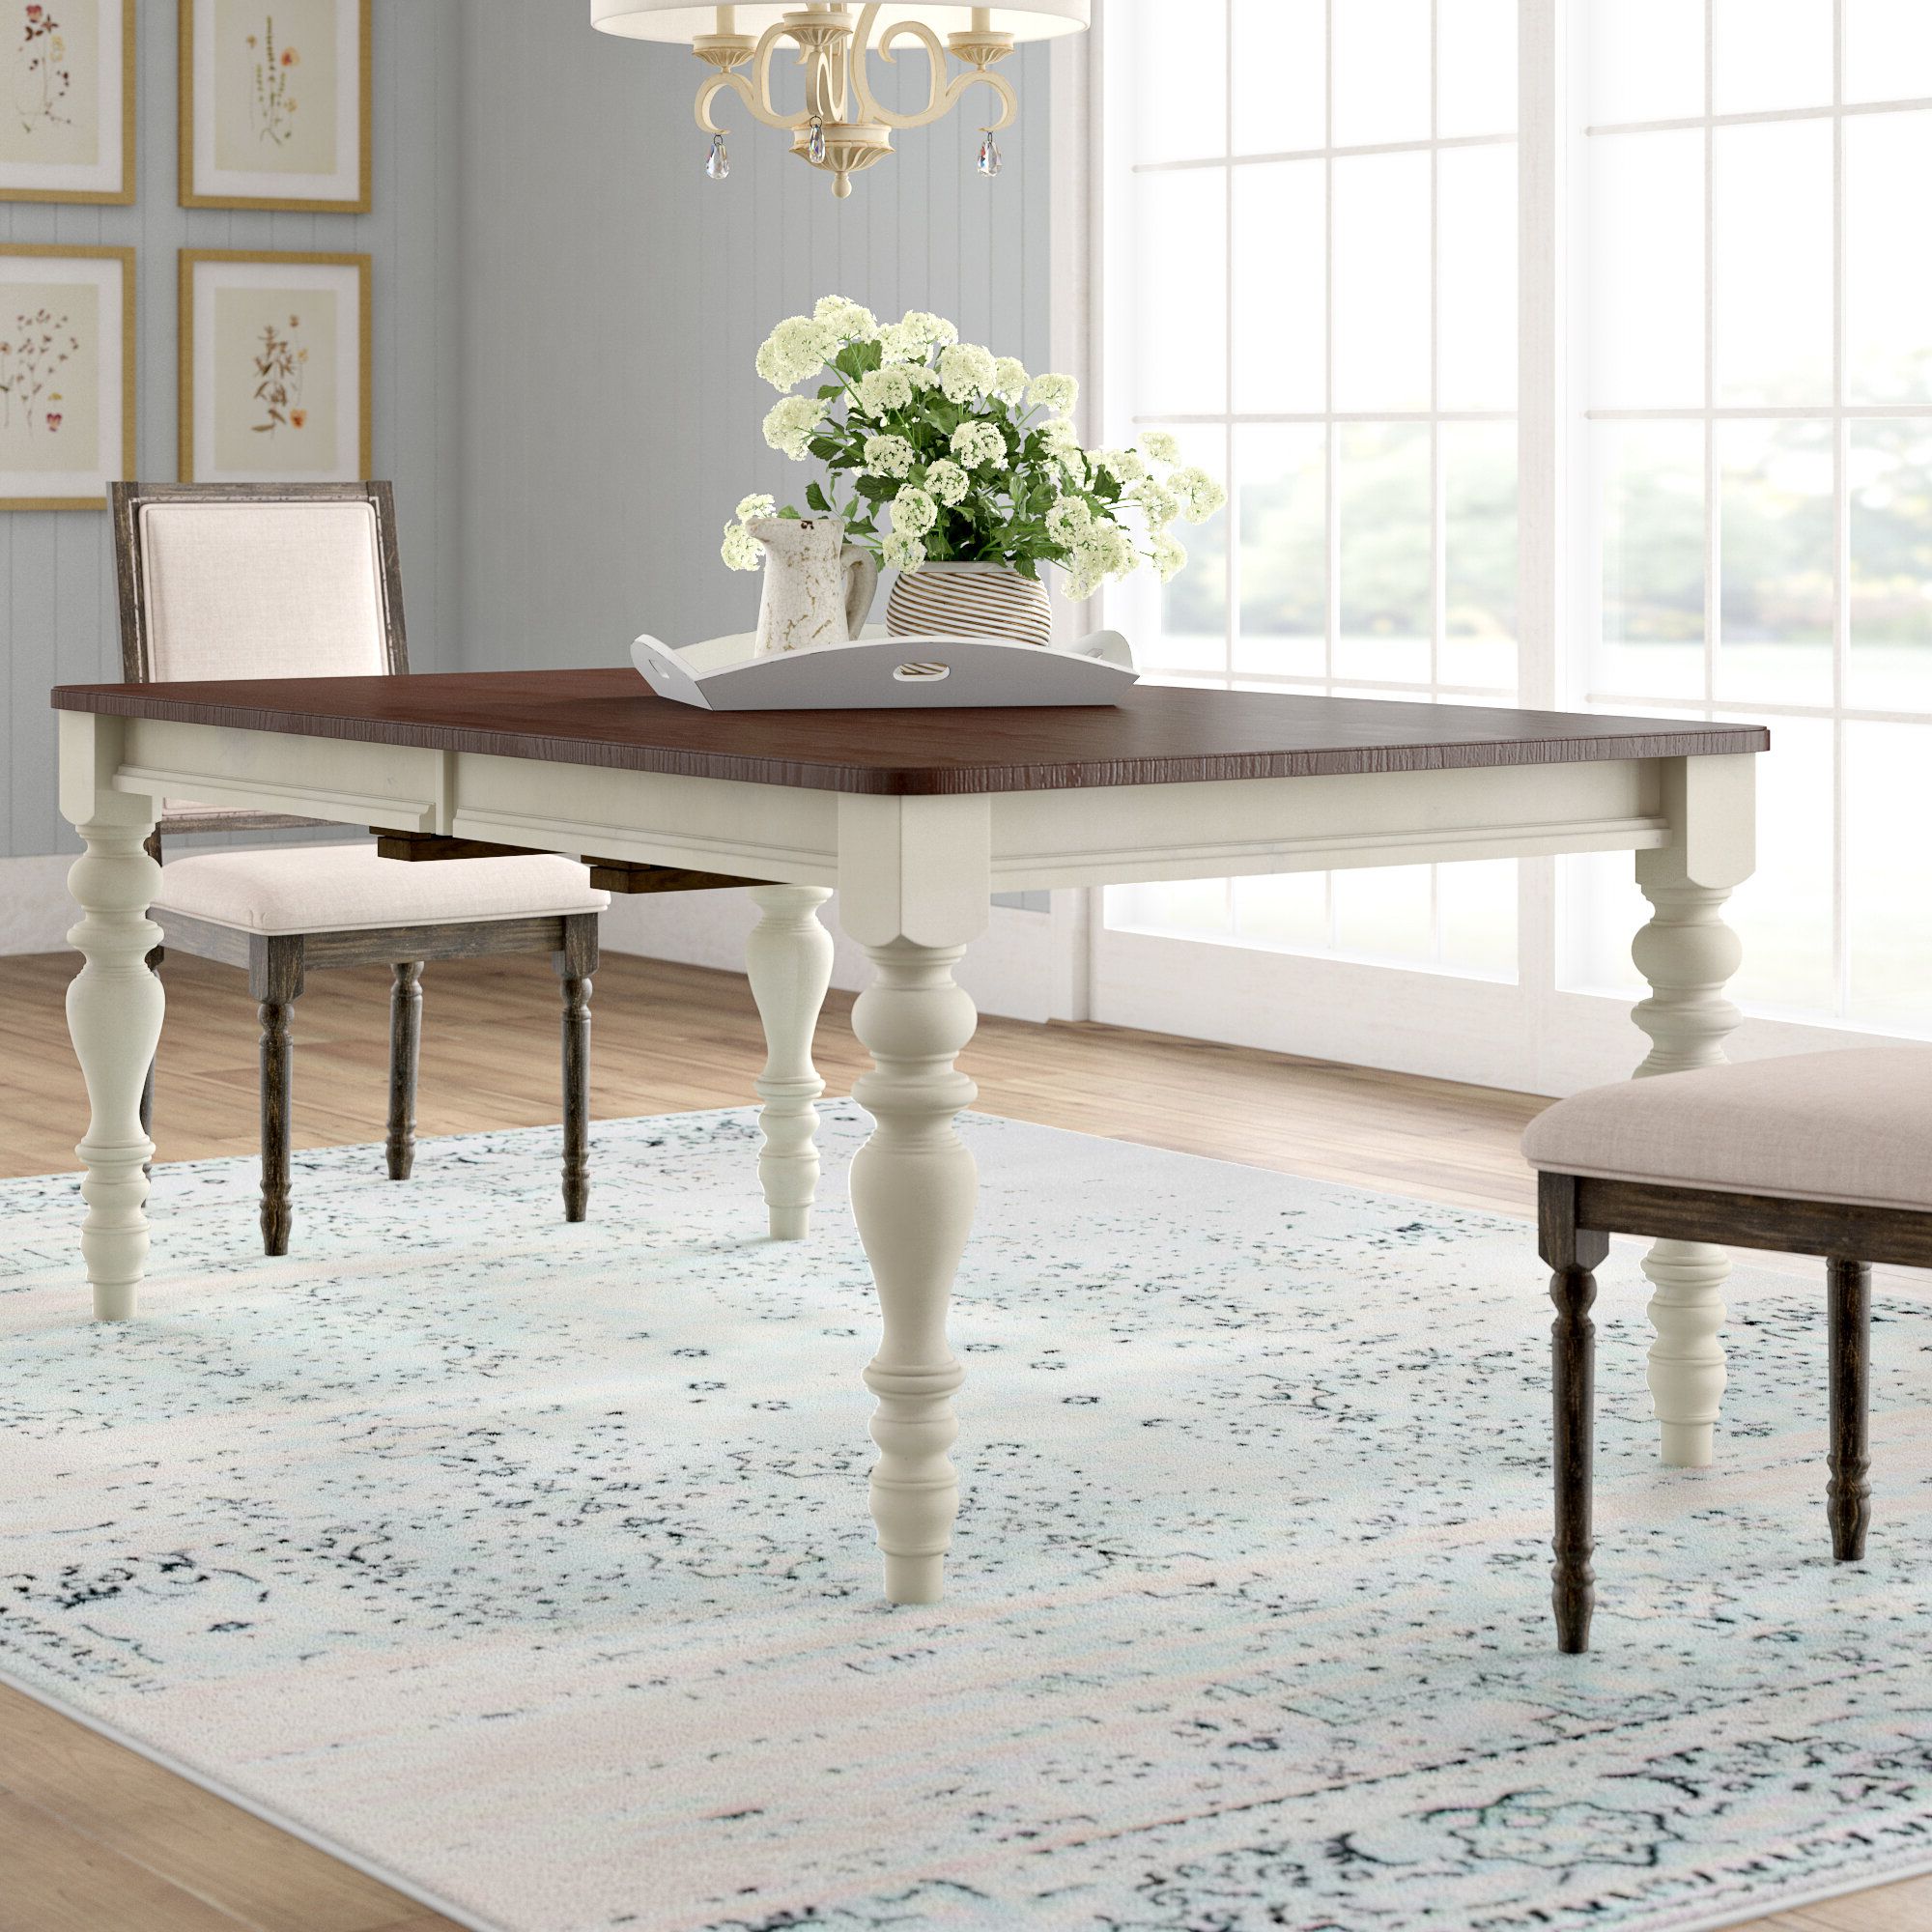 Wood Kitchen Dining Tables With Removable Center Leaf Within Trendy Lark Manor Alise Extendable Solid Wood Dining Table (View 13 of 25)